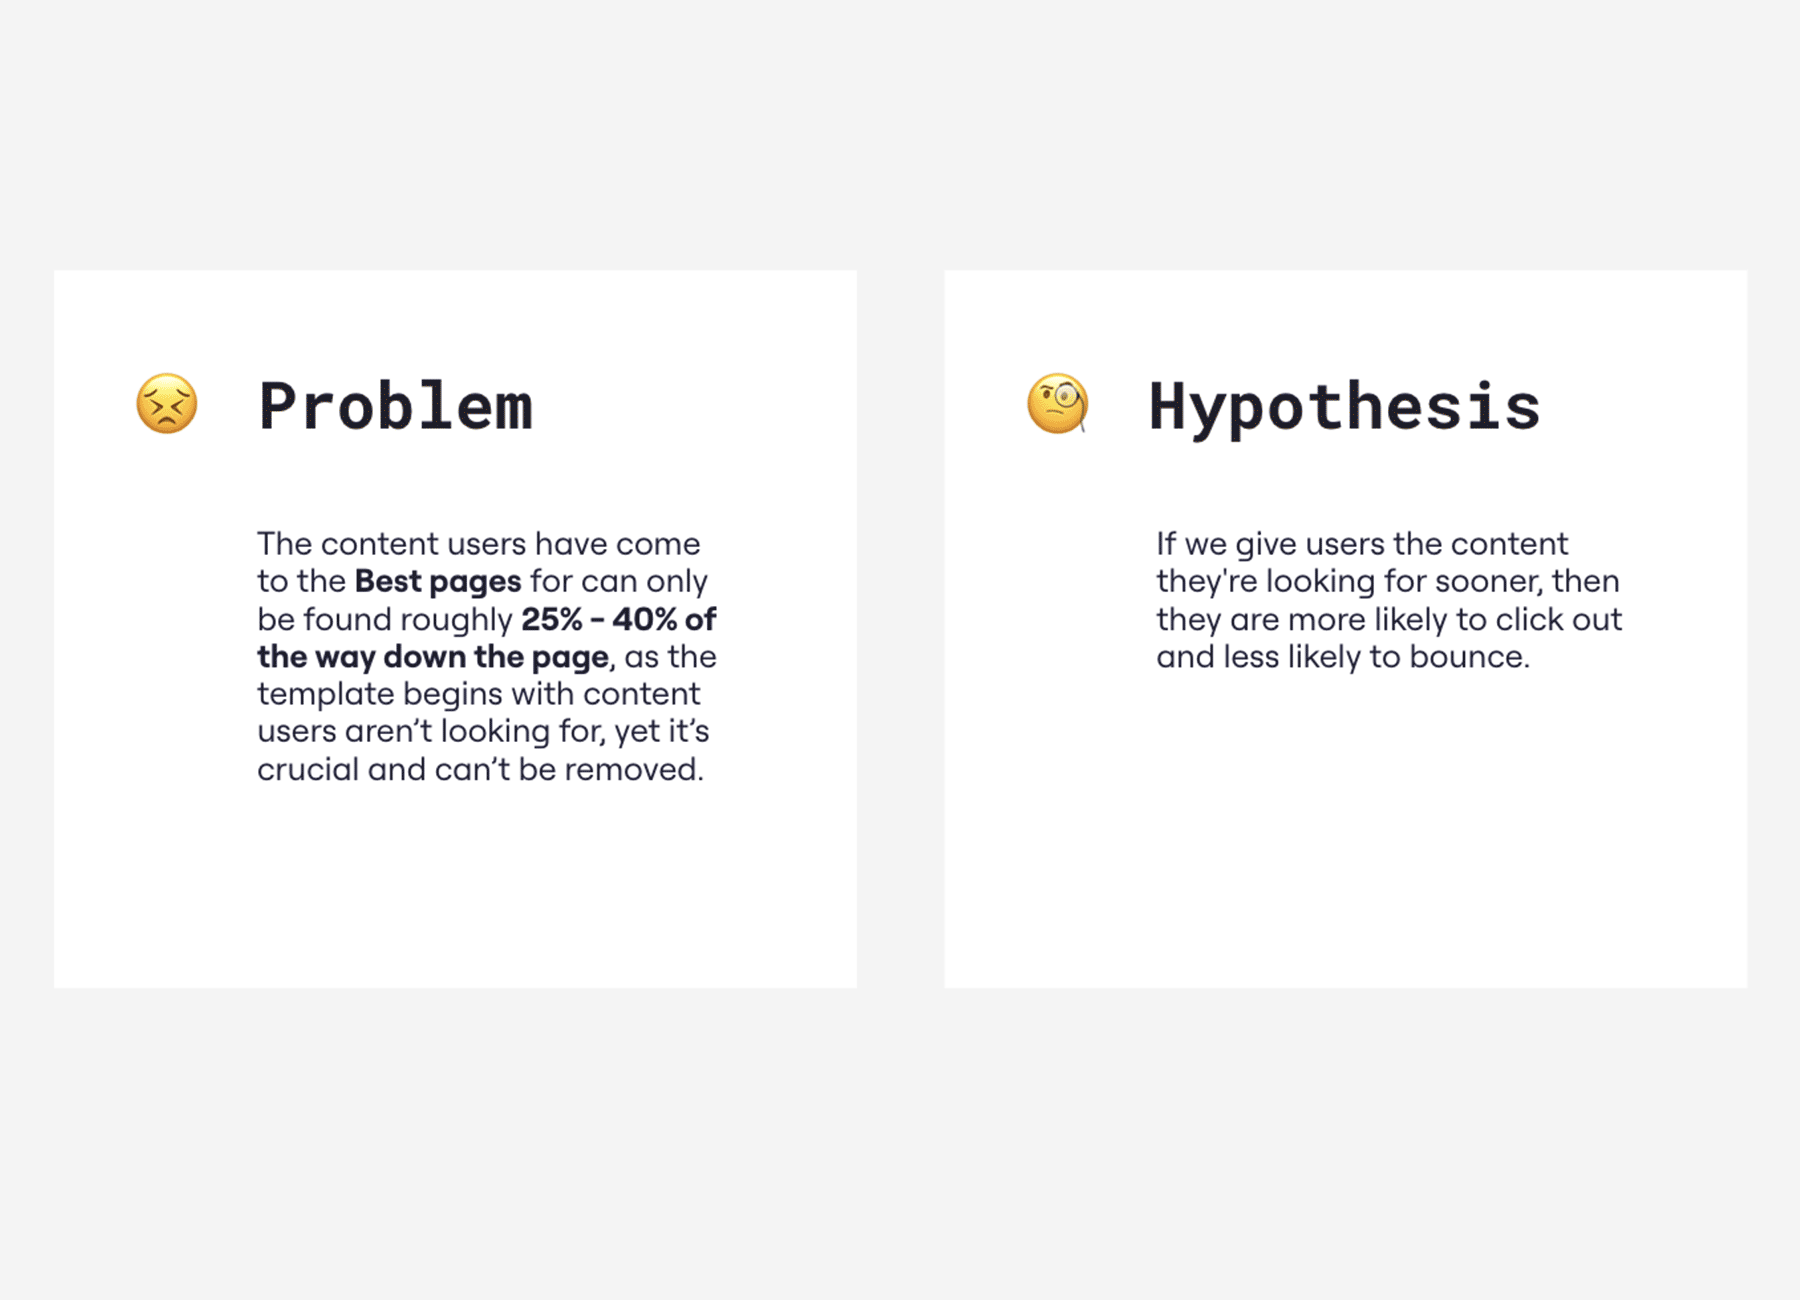 Problem and hypothesis